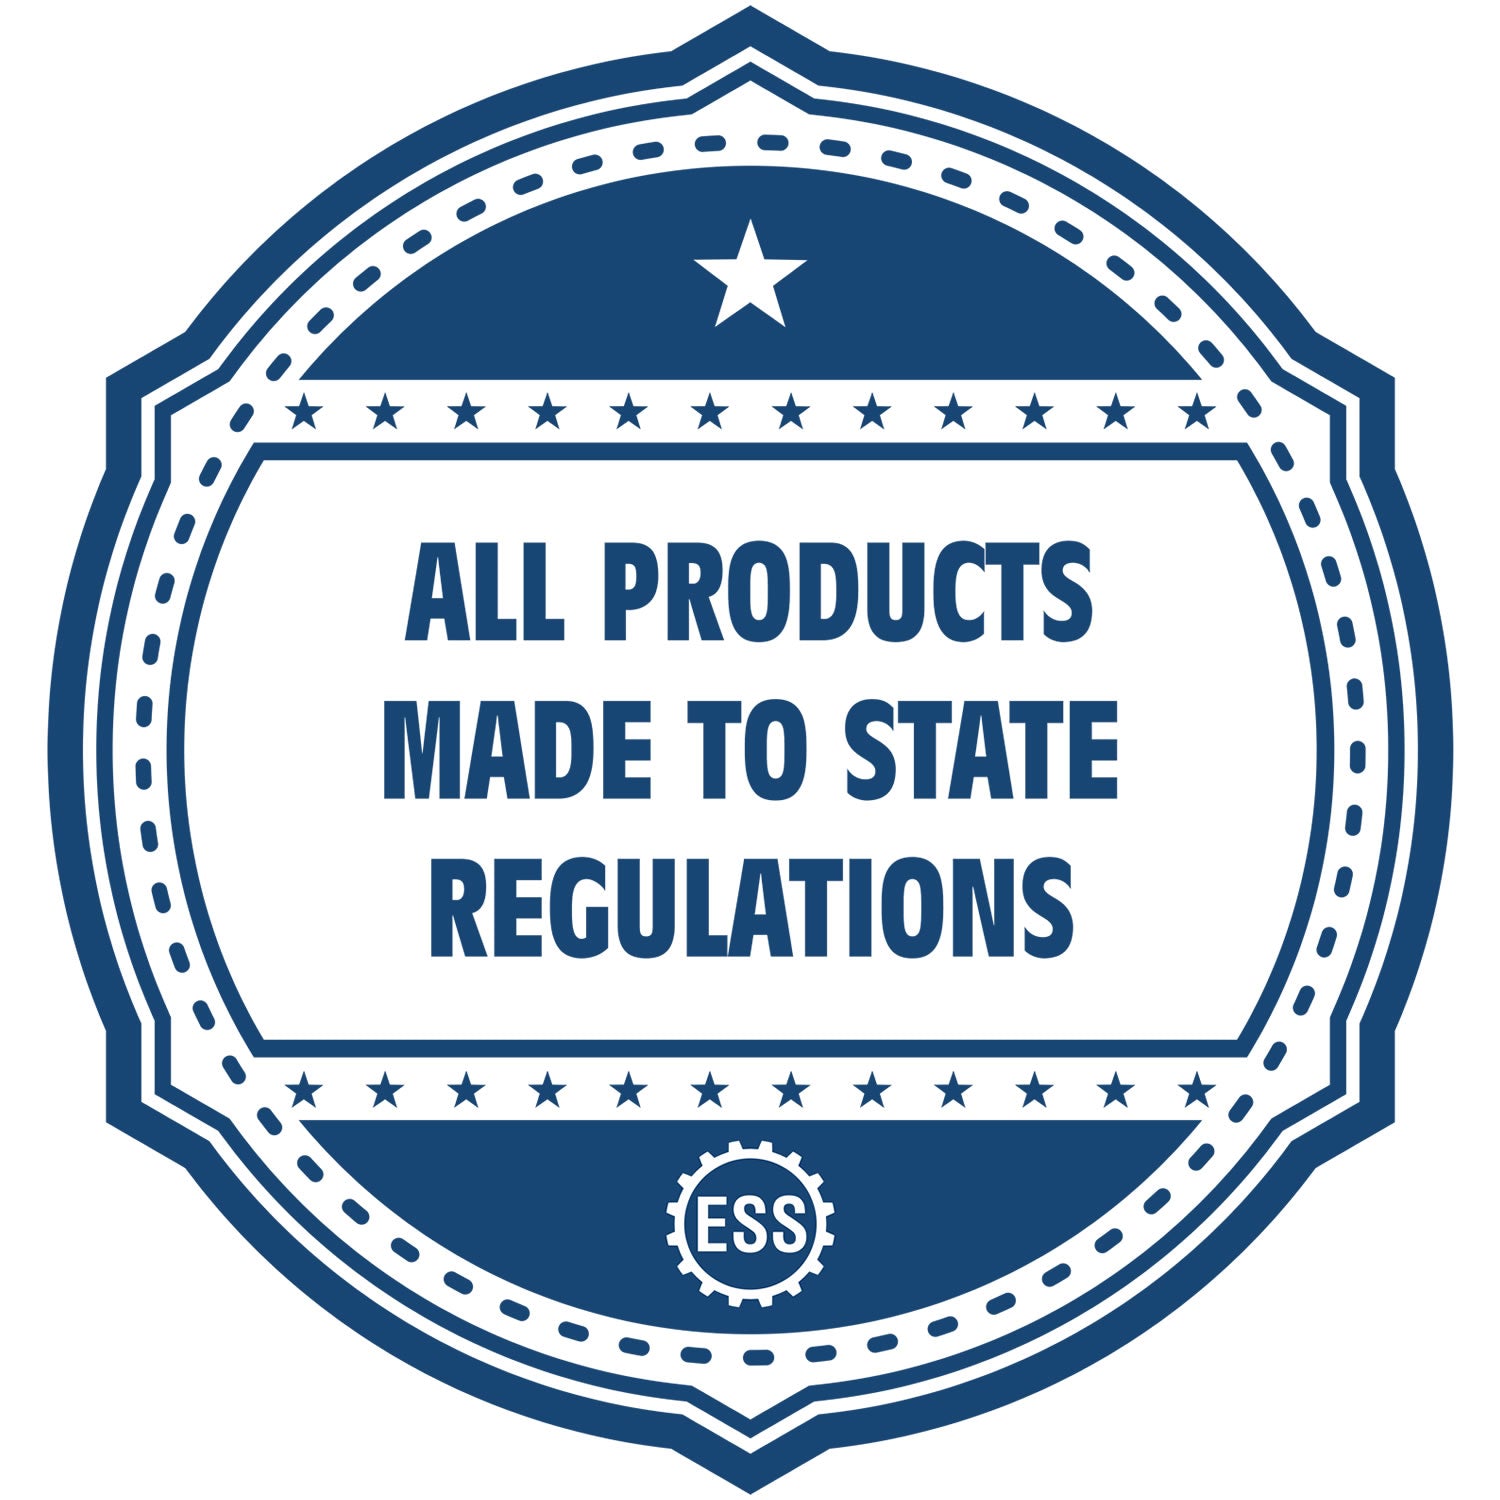 An icon or badge element for the New Mexico Professional Engineer Seal Stamp showing that this product is made in compliance with state regulations.